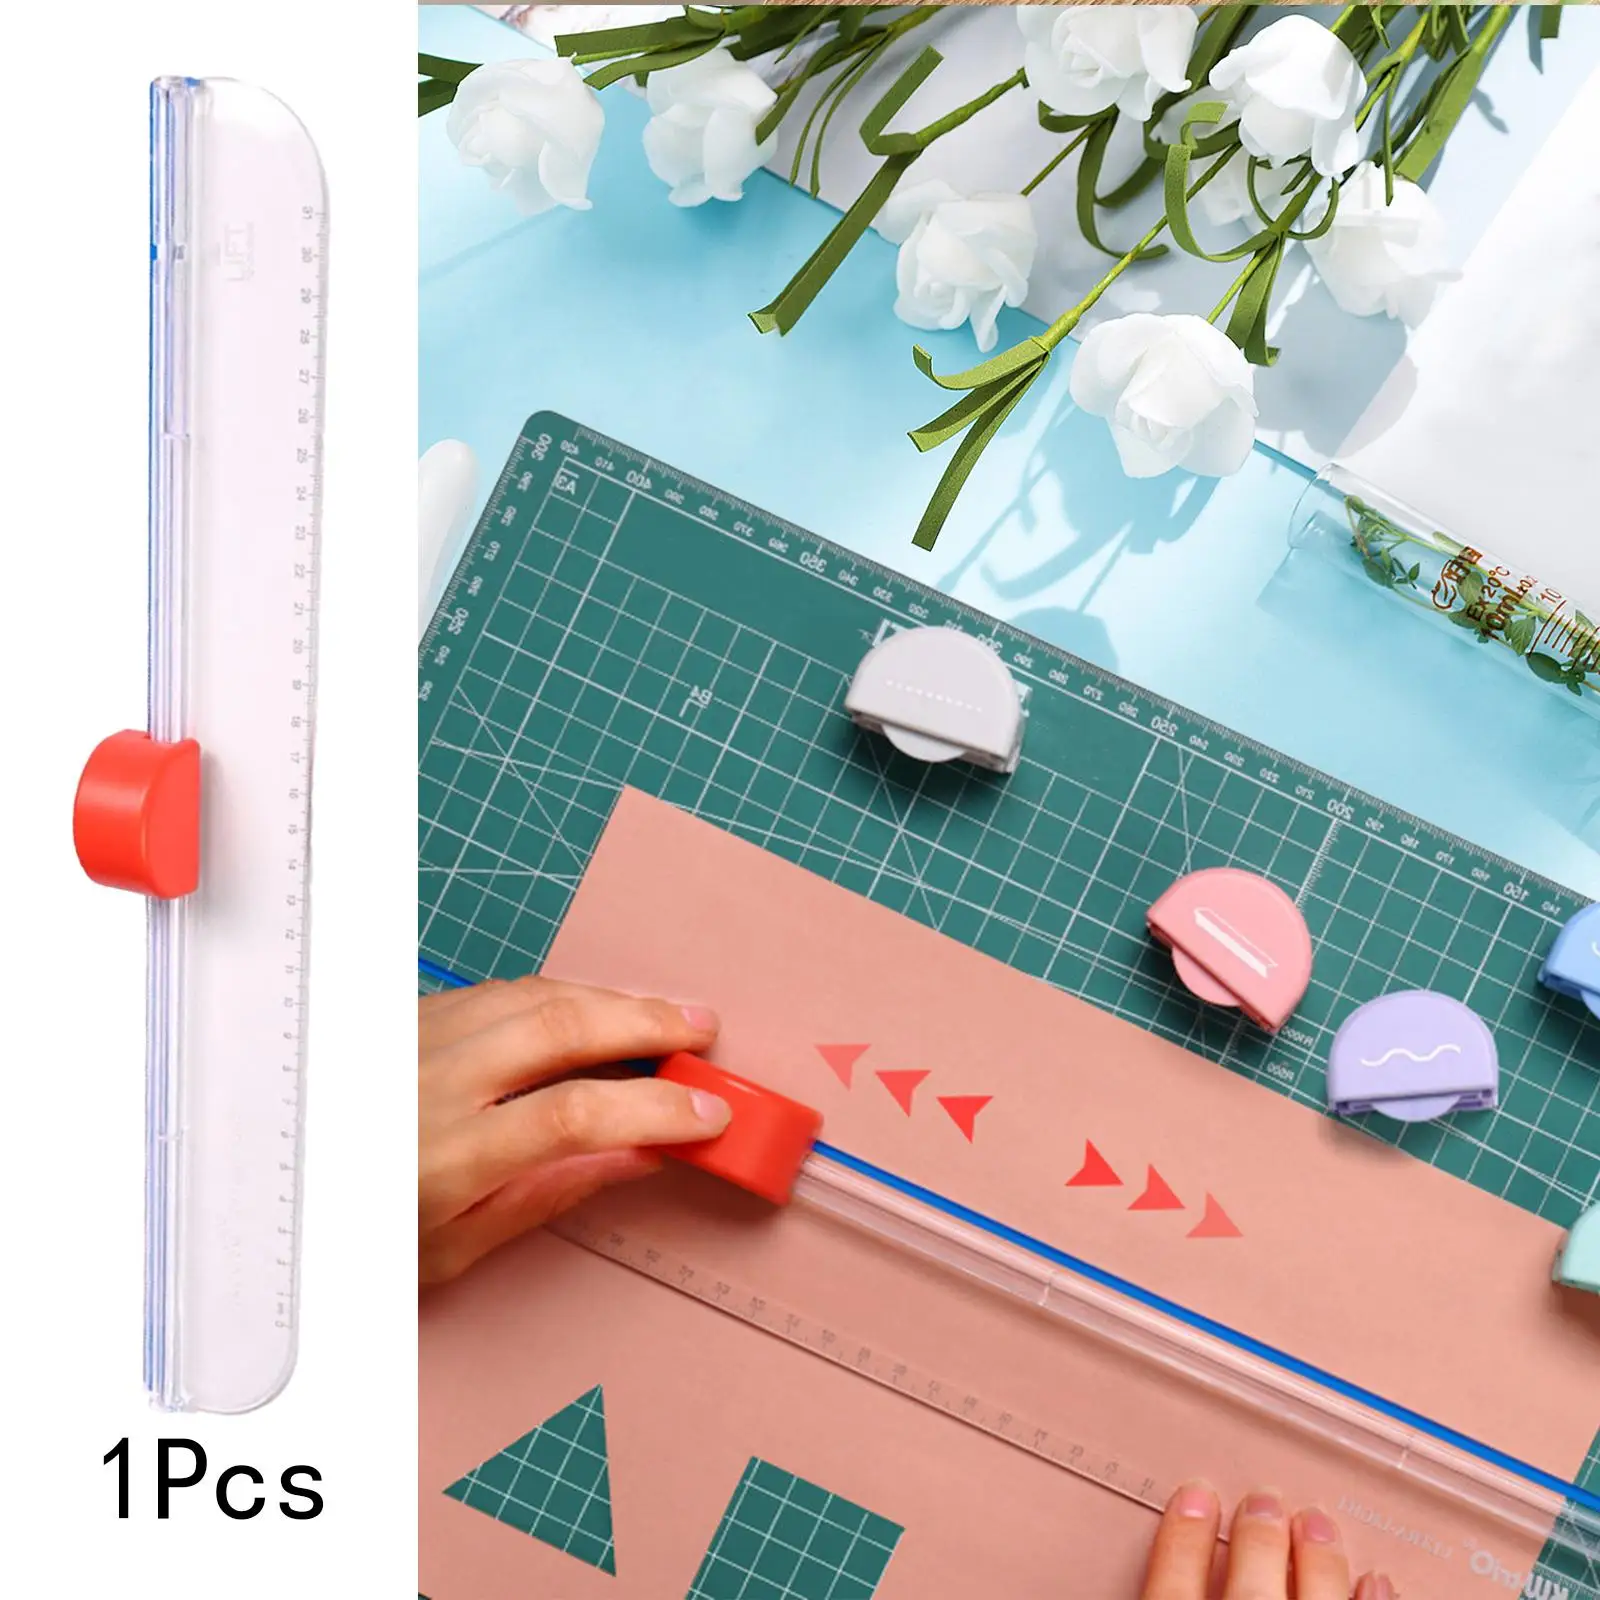 Mini Paper Cutter Paper Trimmer Scrapbooking Tool Multipurpose Durable Portable Paper Slicer for DIY Projects Cardstock